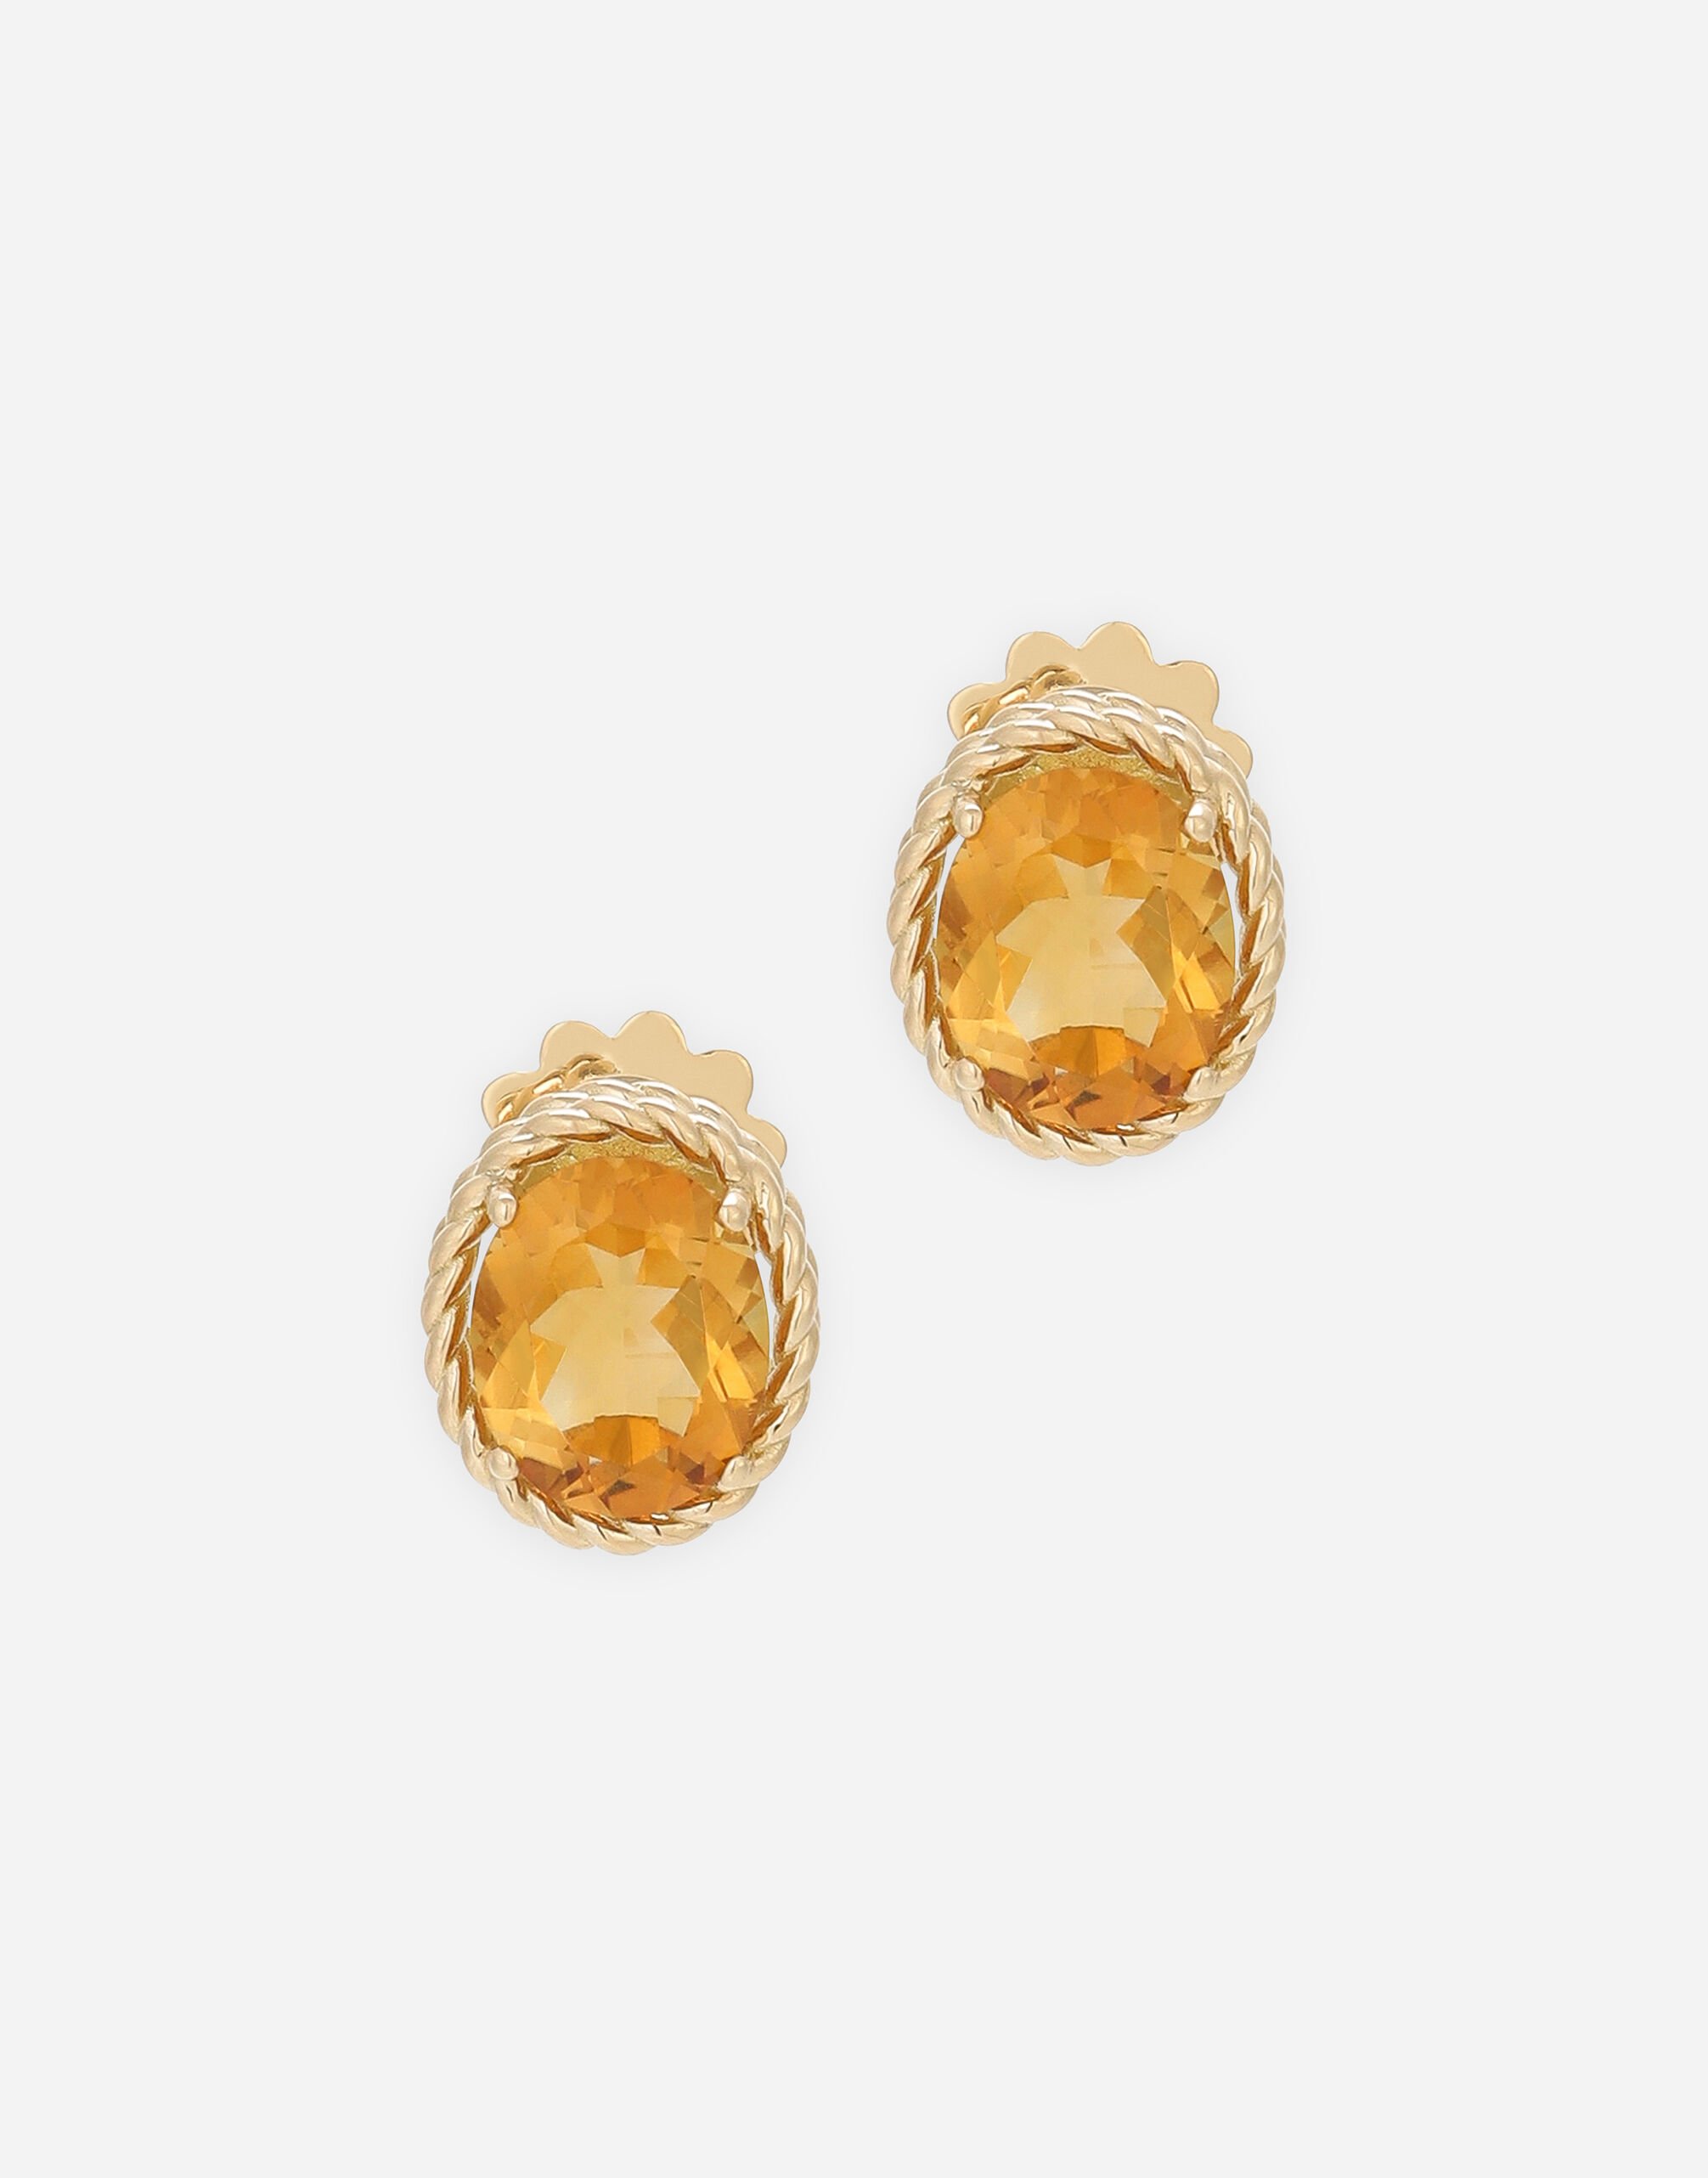 Dolce & Gabbana Anna earrings in yellow gold 18kt with citrines Yellow Gold WAQR2GWMIX1